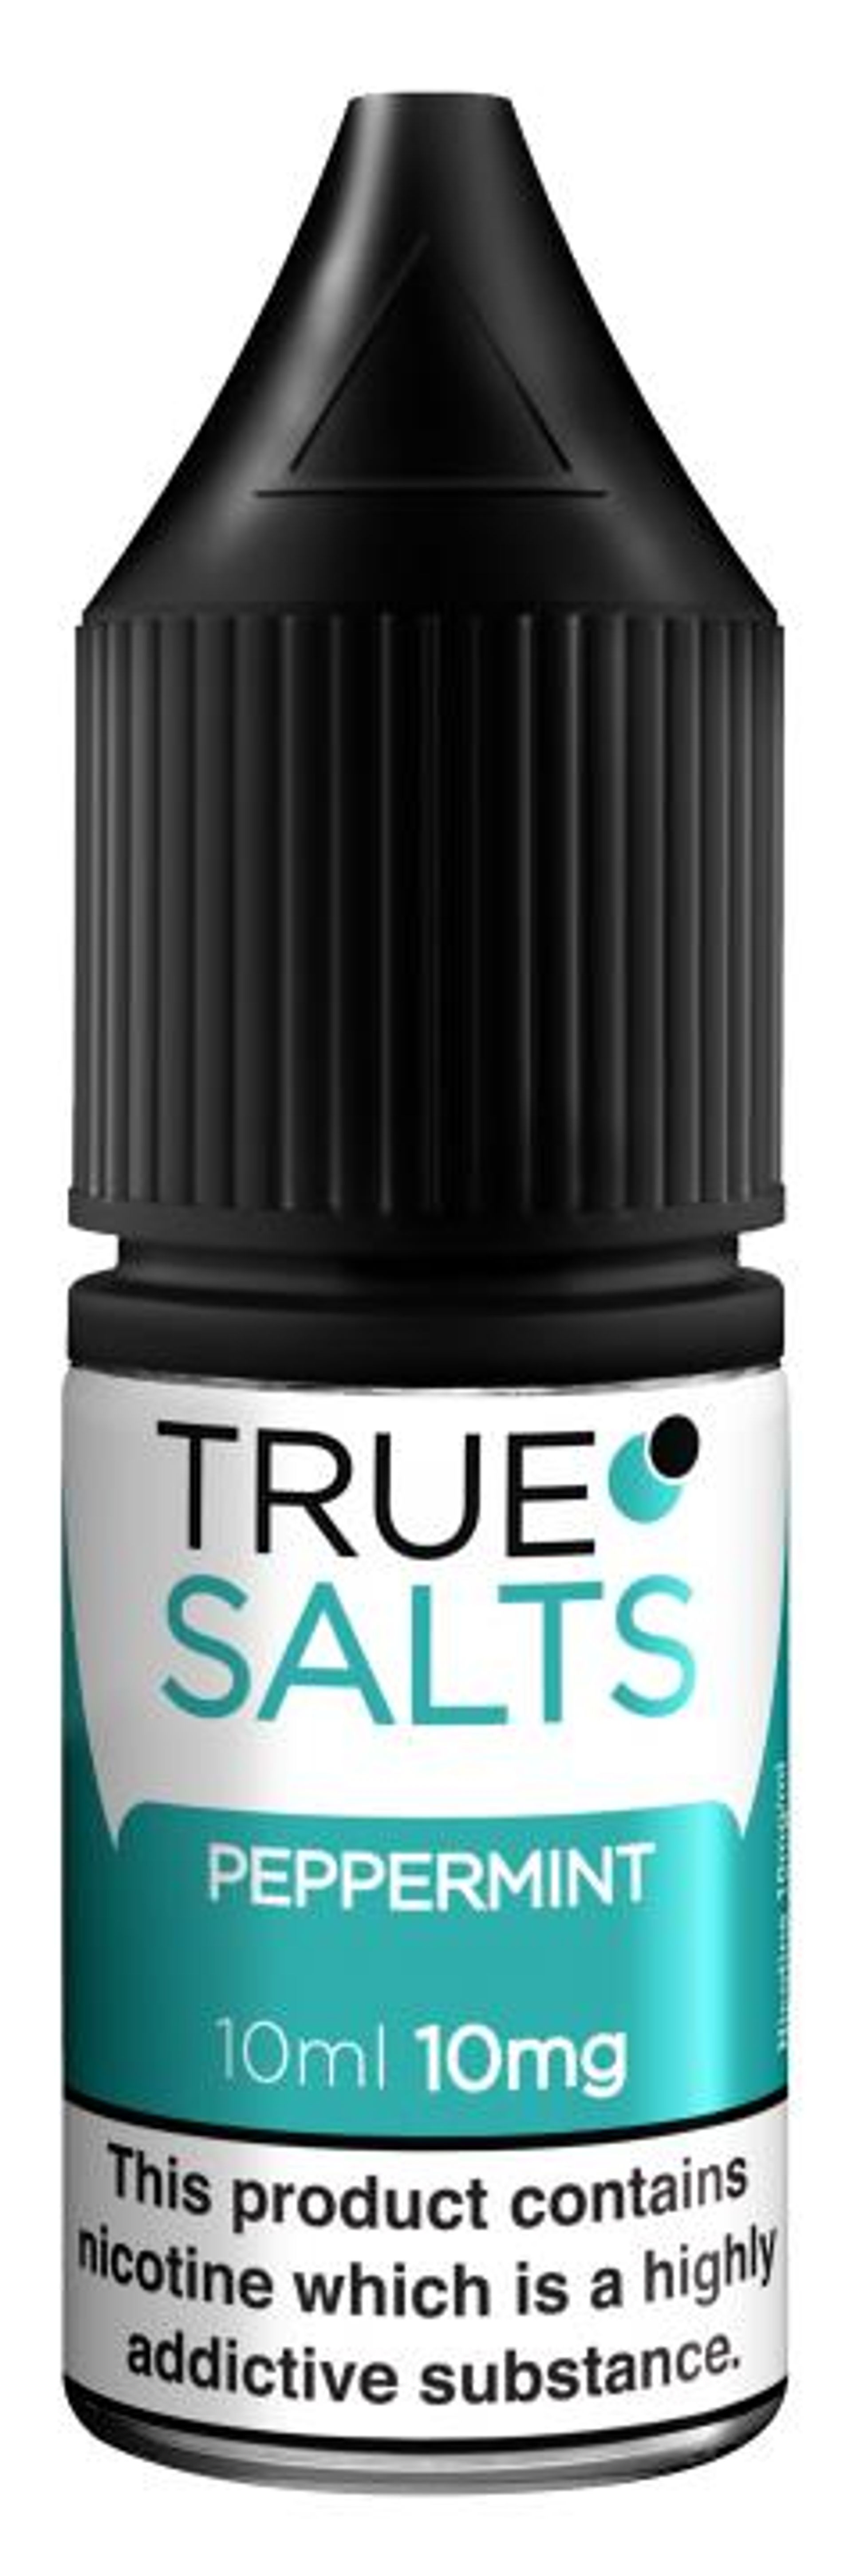 Image of Peppermint by True Salts